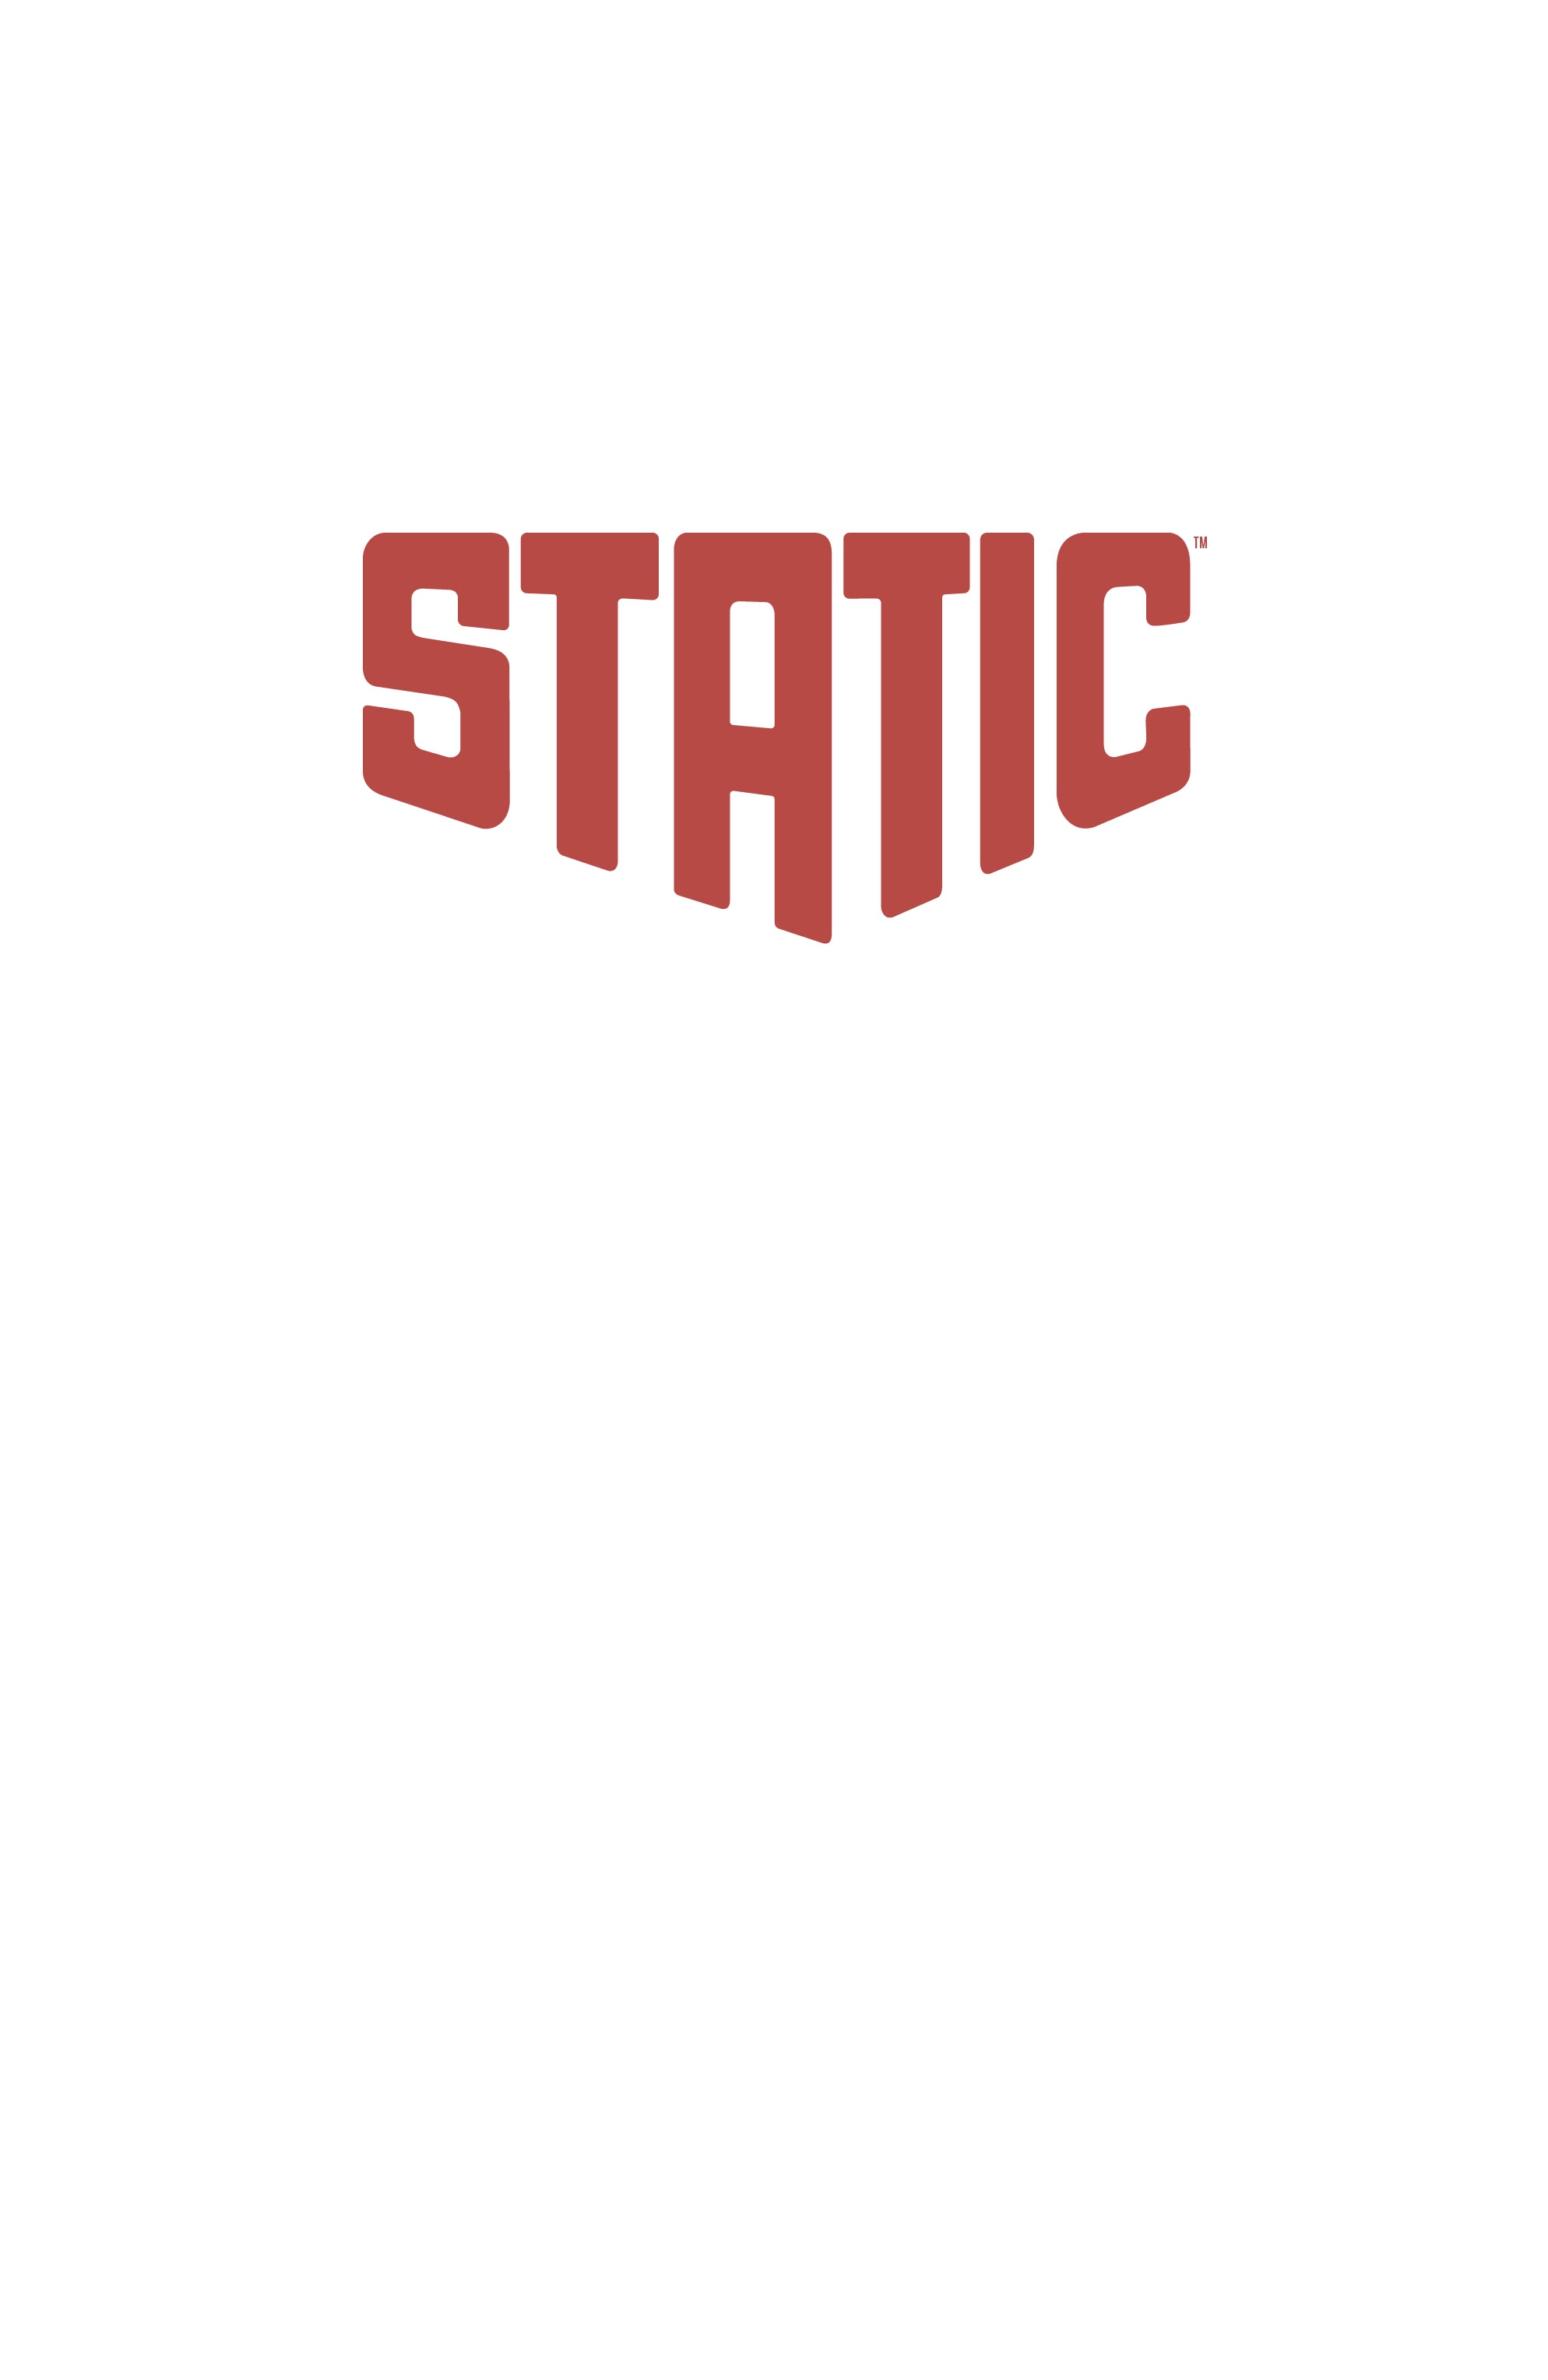 Read online Static (2021) comic -  Issue # TPB - 2